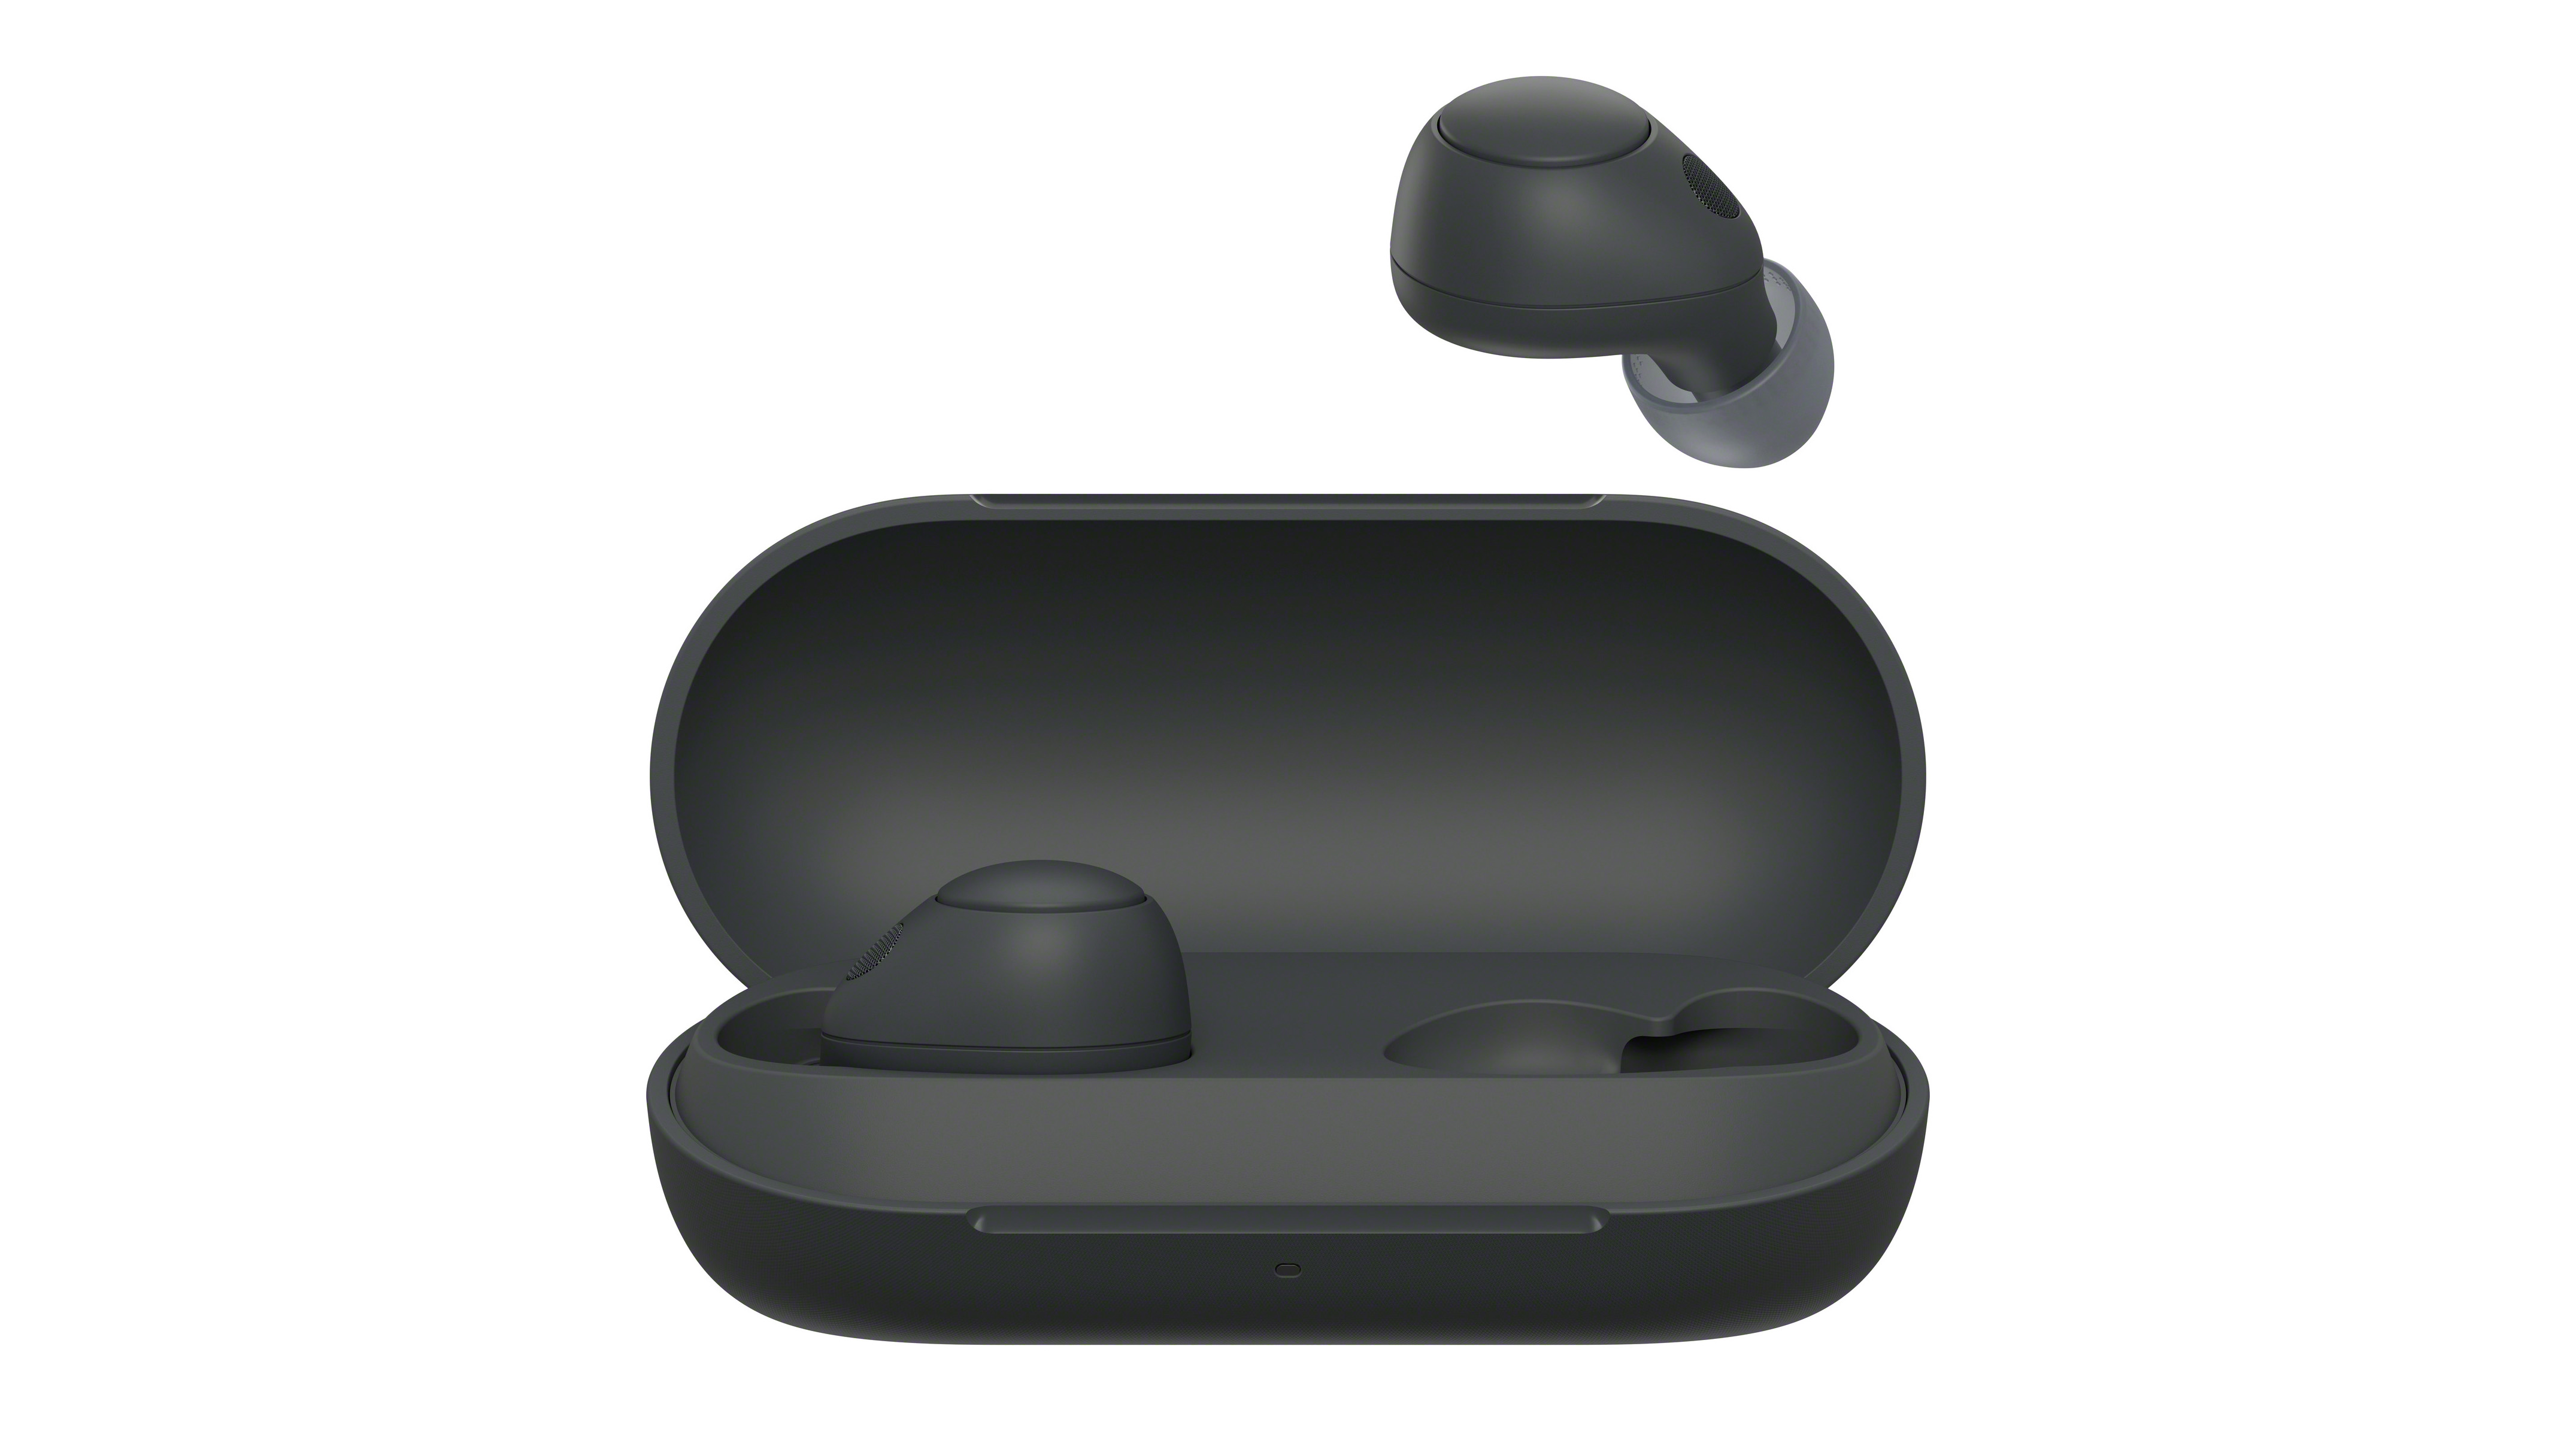 Sony WF-C700N earbuds in black on white background